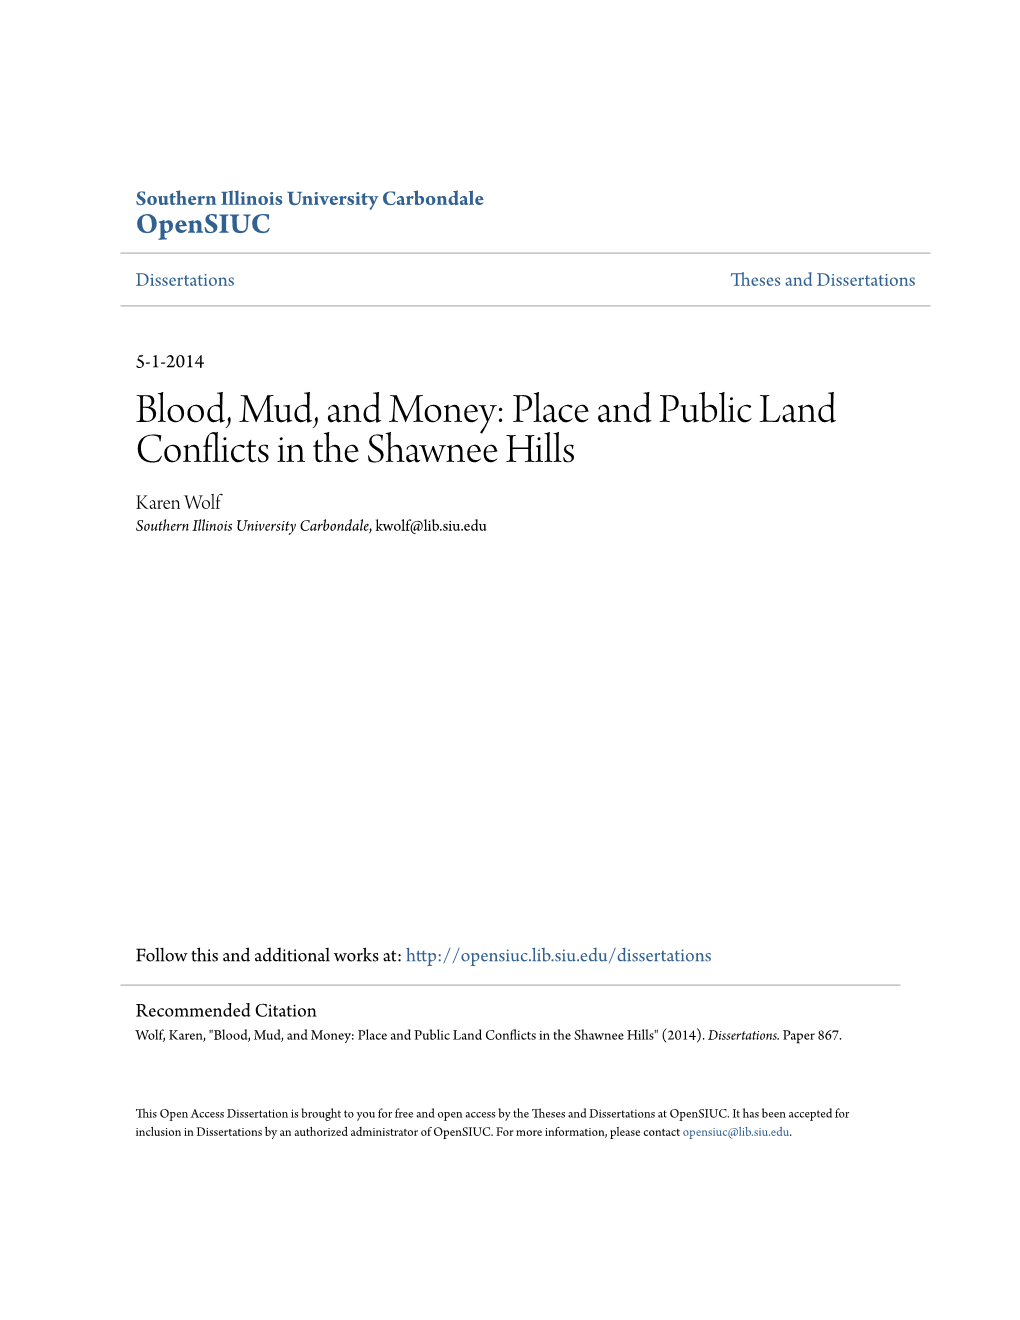 Place and Public Land Conflicts in the Shawnee Hills Karen Wolf Southern Illinois University Carbondale, Kwolf@Lib.Siu.Edu